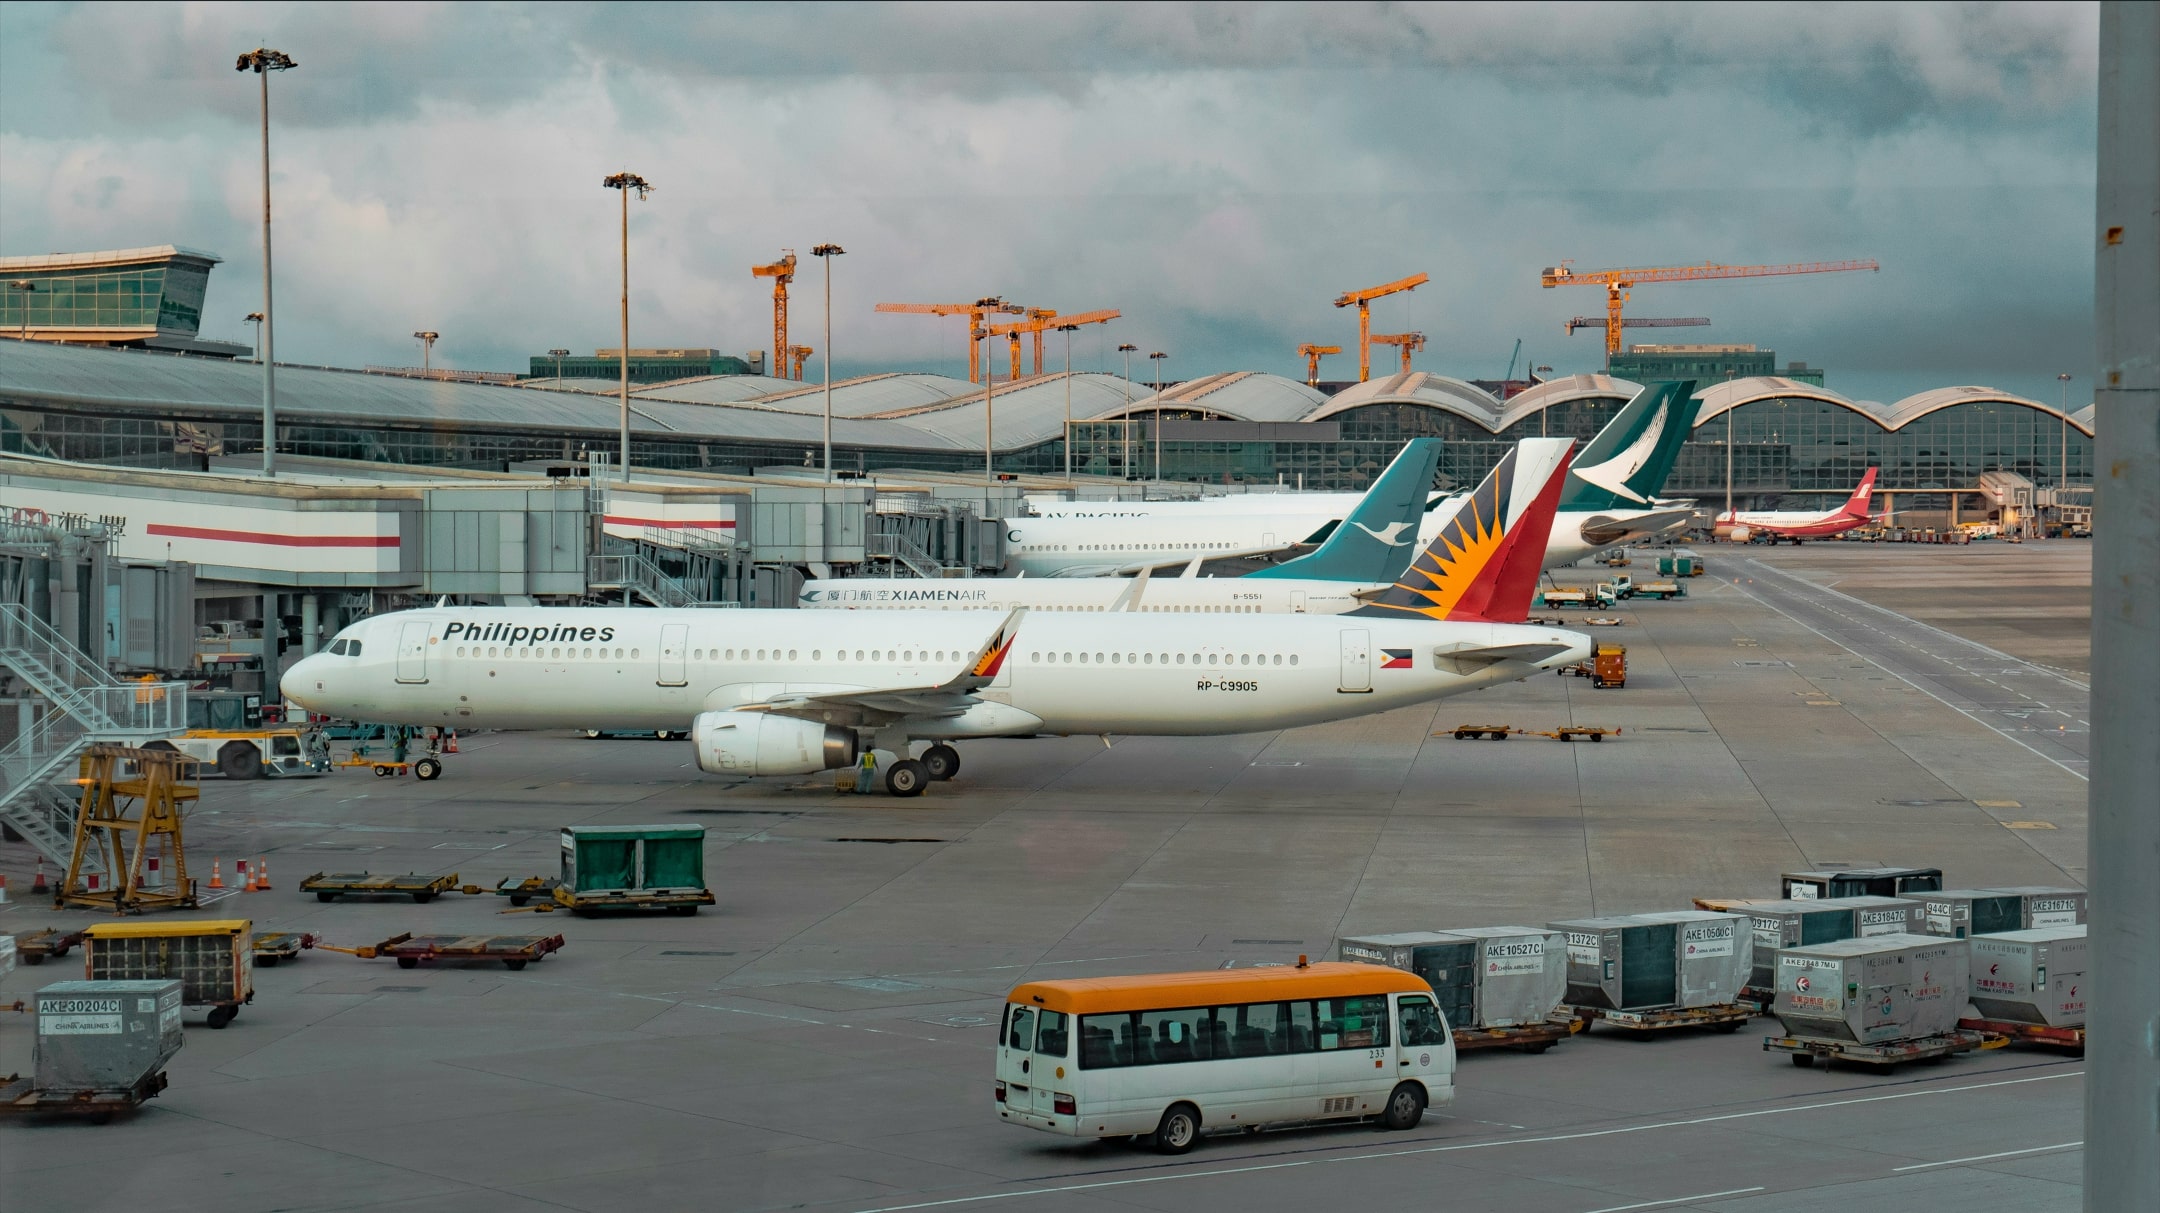 Chinese-owned businesses in the Philippines - Philippine Airlines